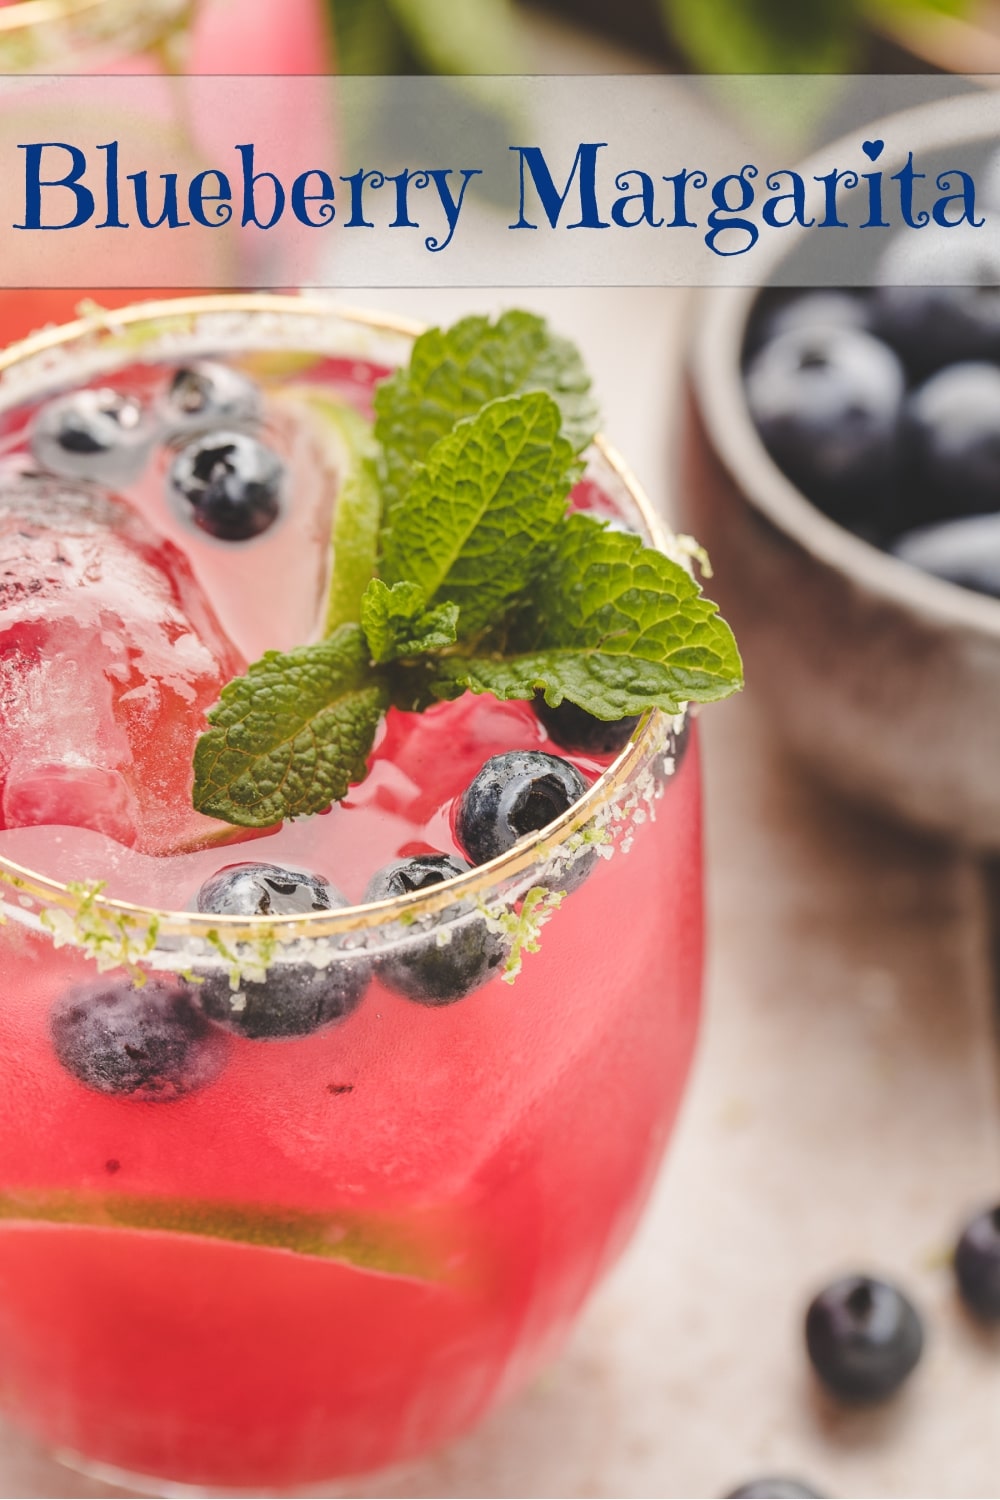 This Blueberry Margarita recipe is a twist on the classic with a harmonious combination of tequila, Cointreau and freshly squeezed lime. Served with a salty, citrus rim, this fresh blueberry cocktail is quick and easy to make and irresistibly refreshing. via @cmpollak1